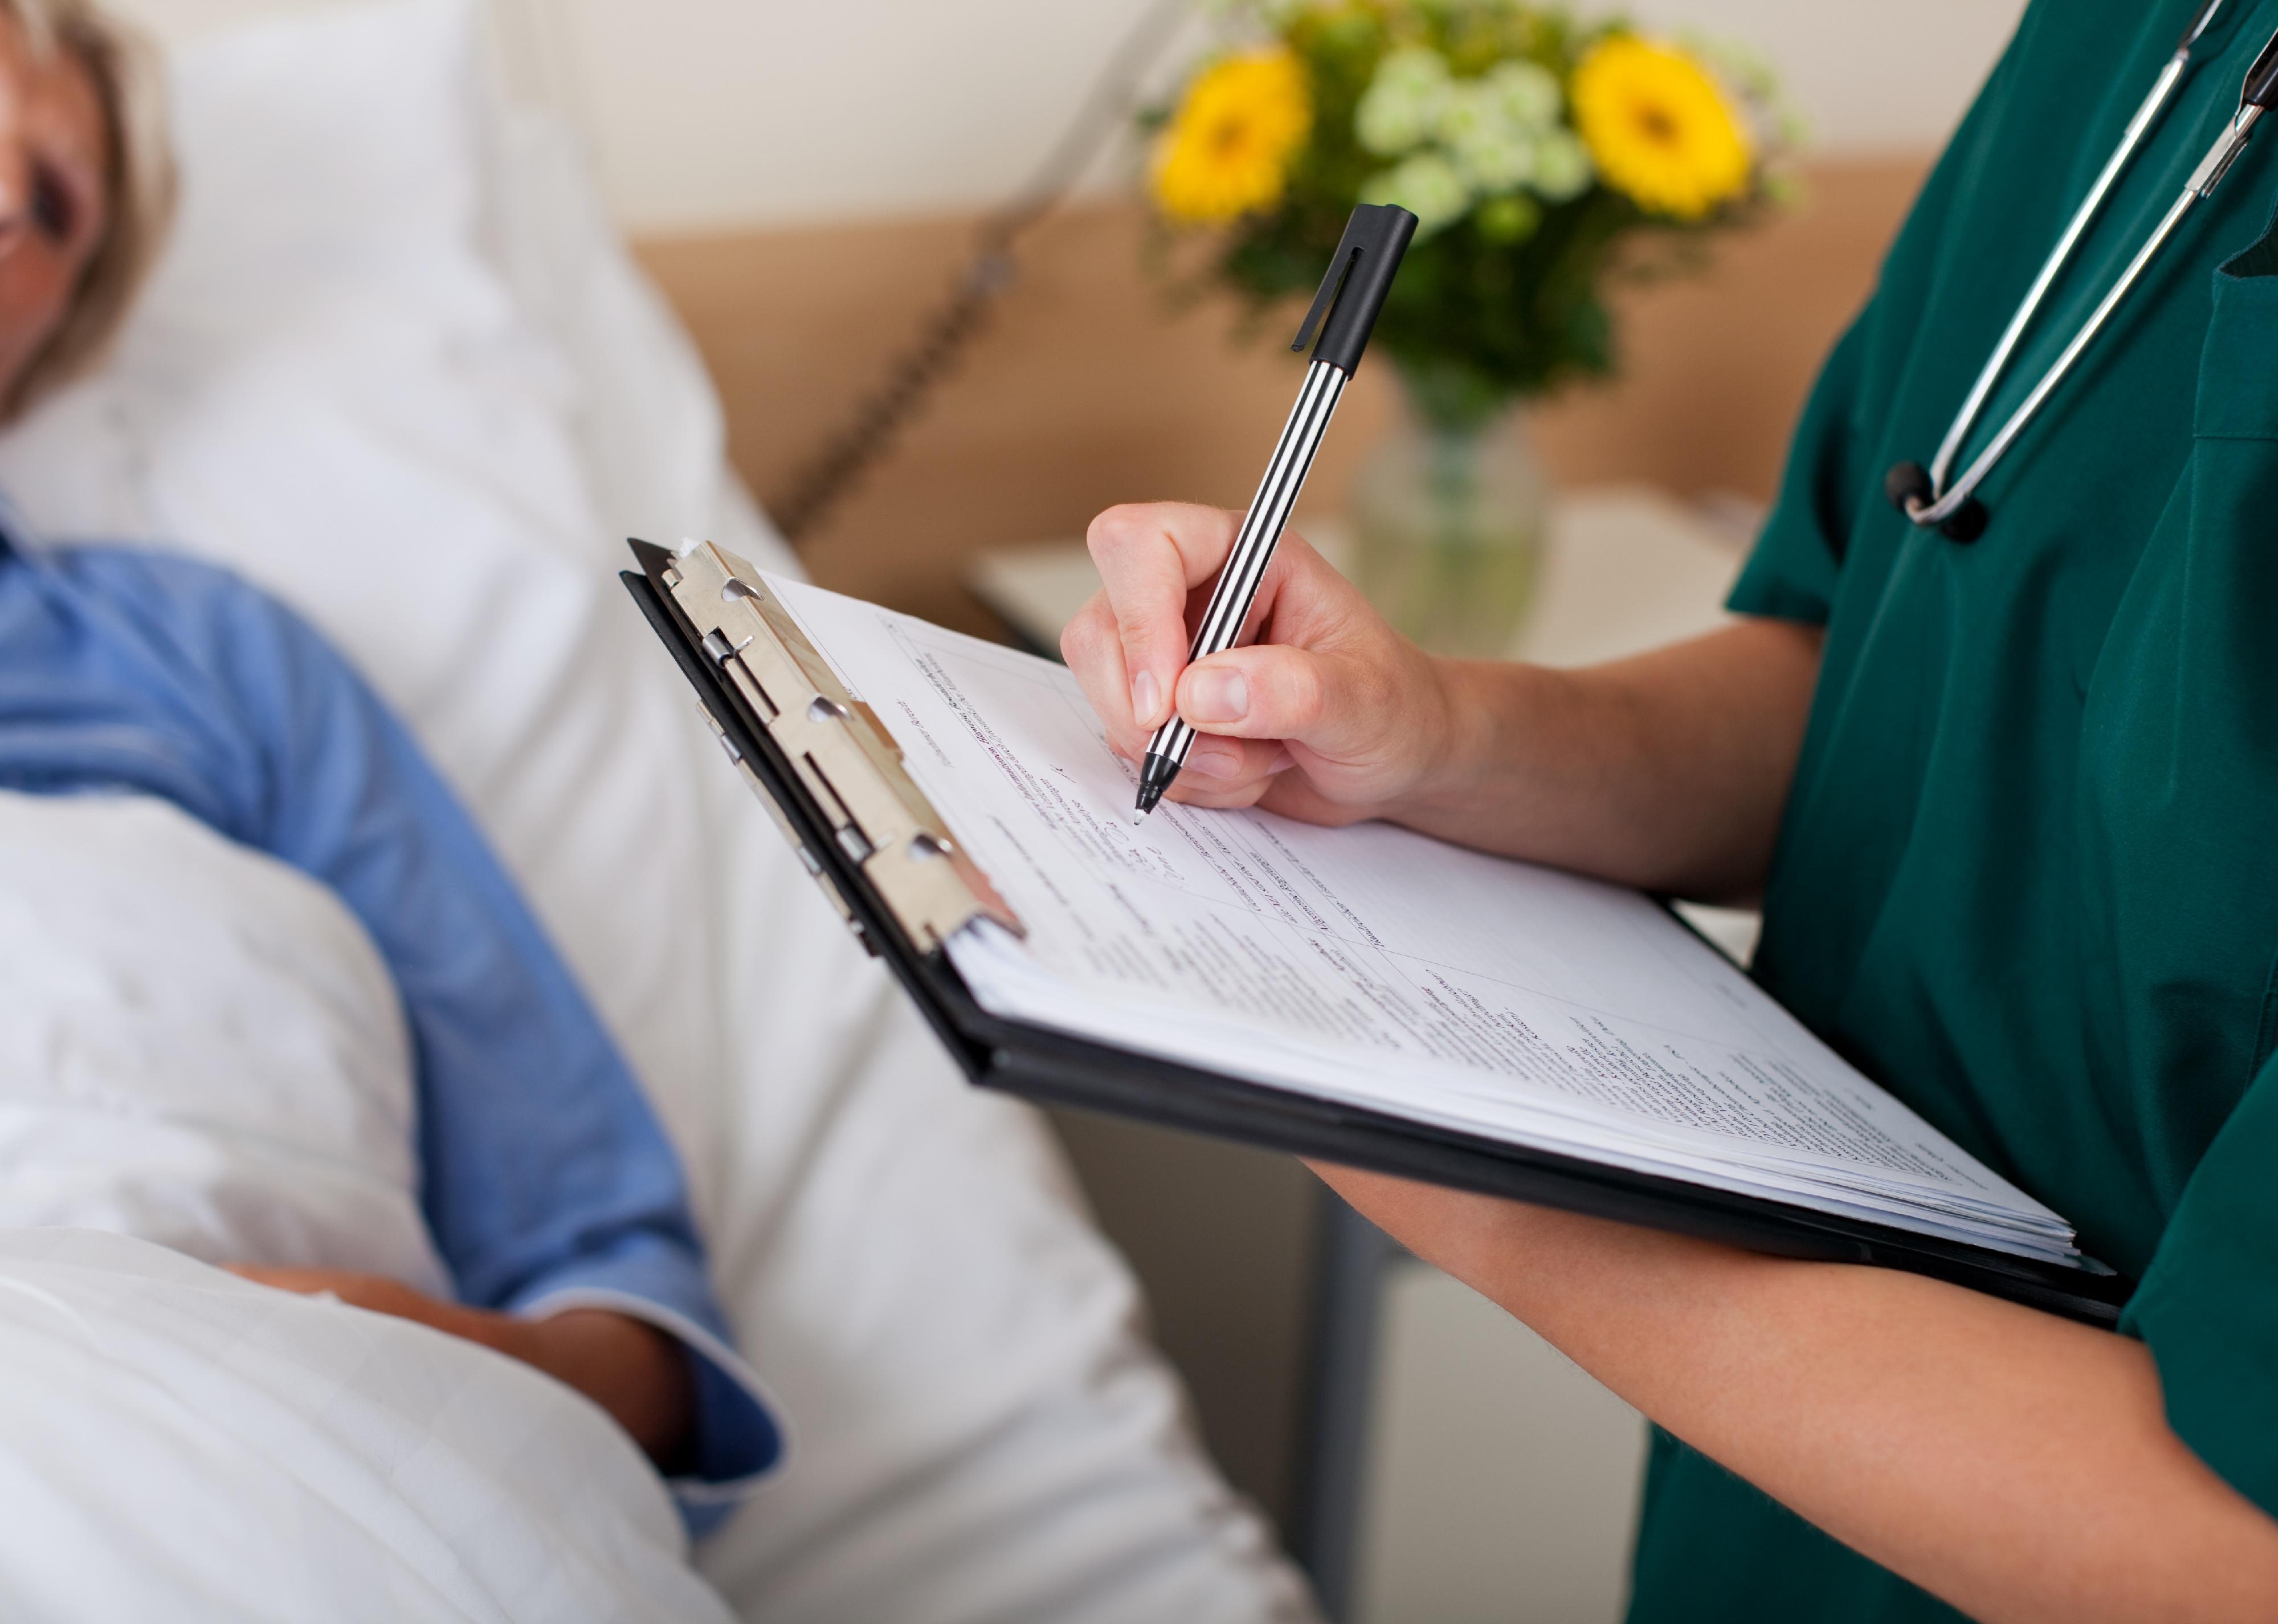 Nurse writing on clipboard with patient in background in a hospital bed.